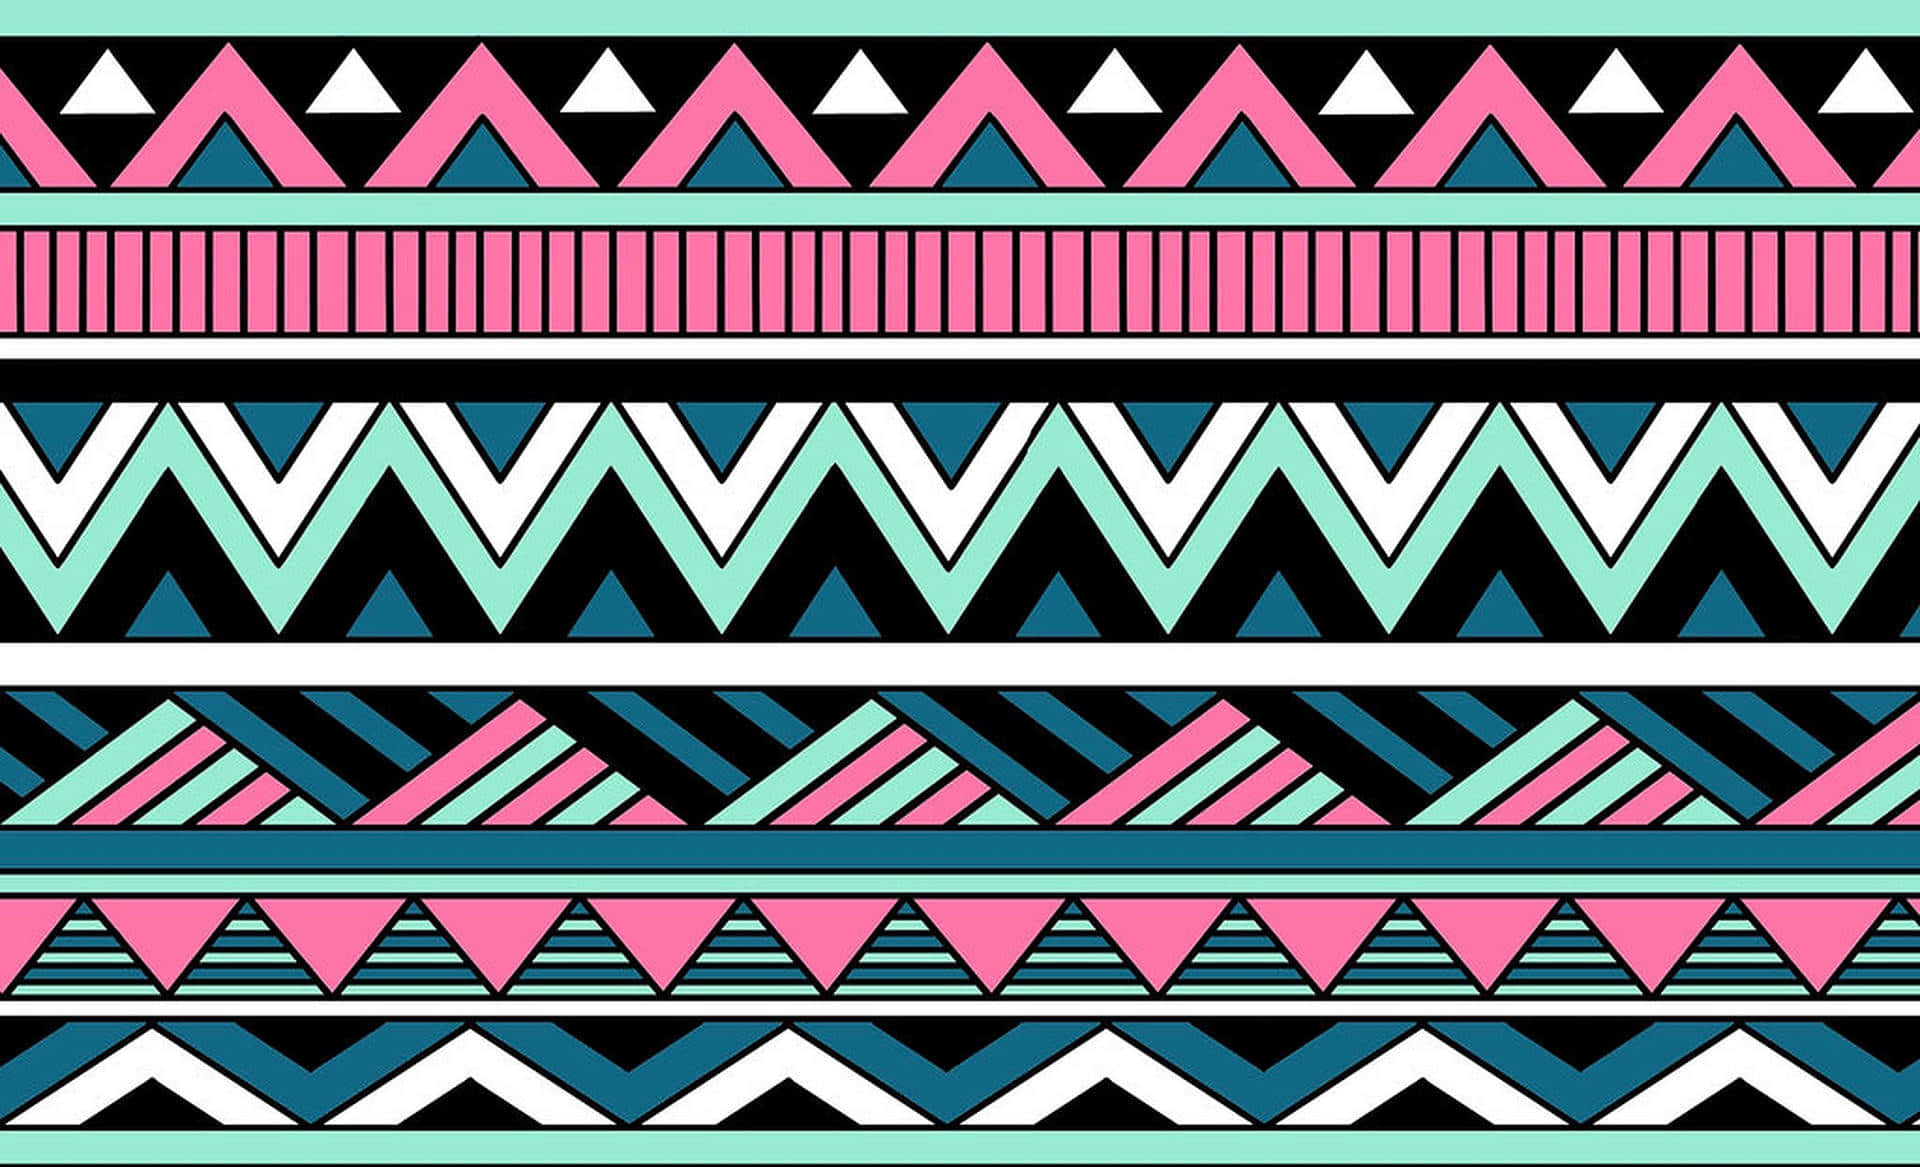 A Colorful Aztec Pattern With Pink, Blue And Black Stripes